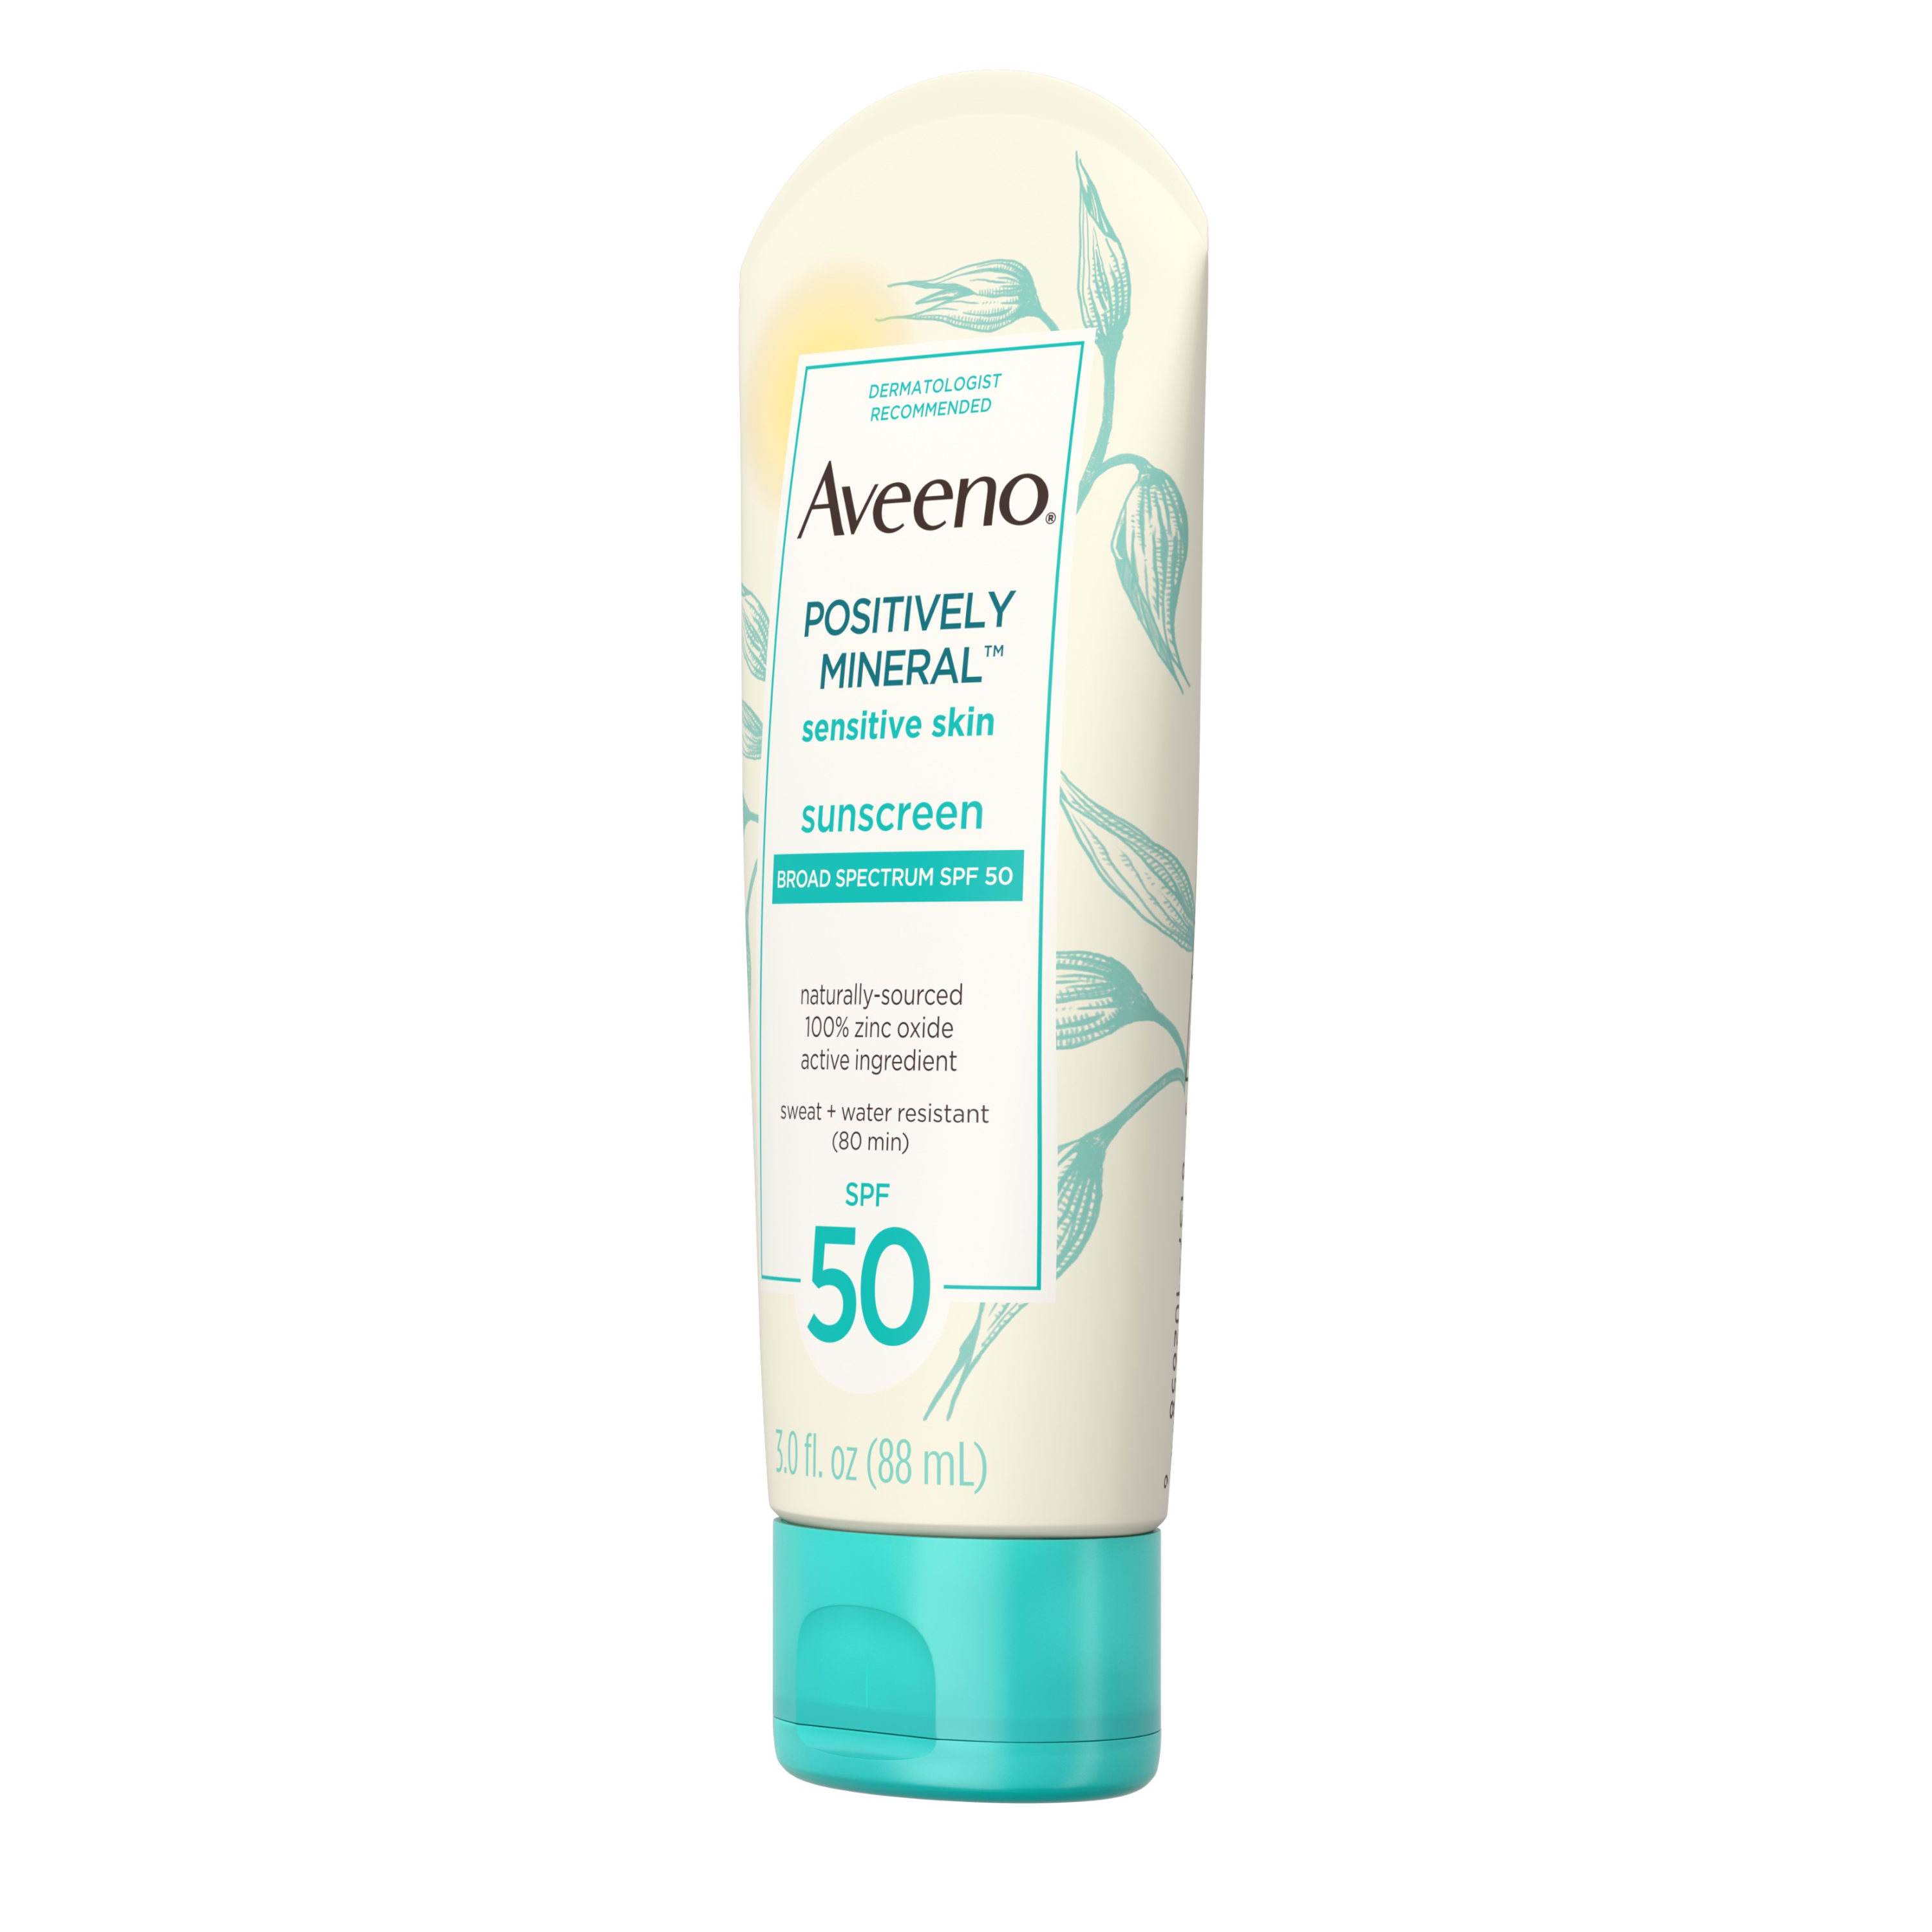 Aveeno Positively Mineral Sensitive Sunscreen Lotion SPF 50, 3 fl. oz - image 12 of 16